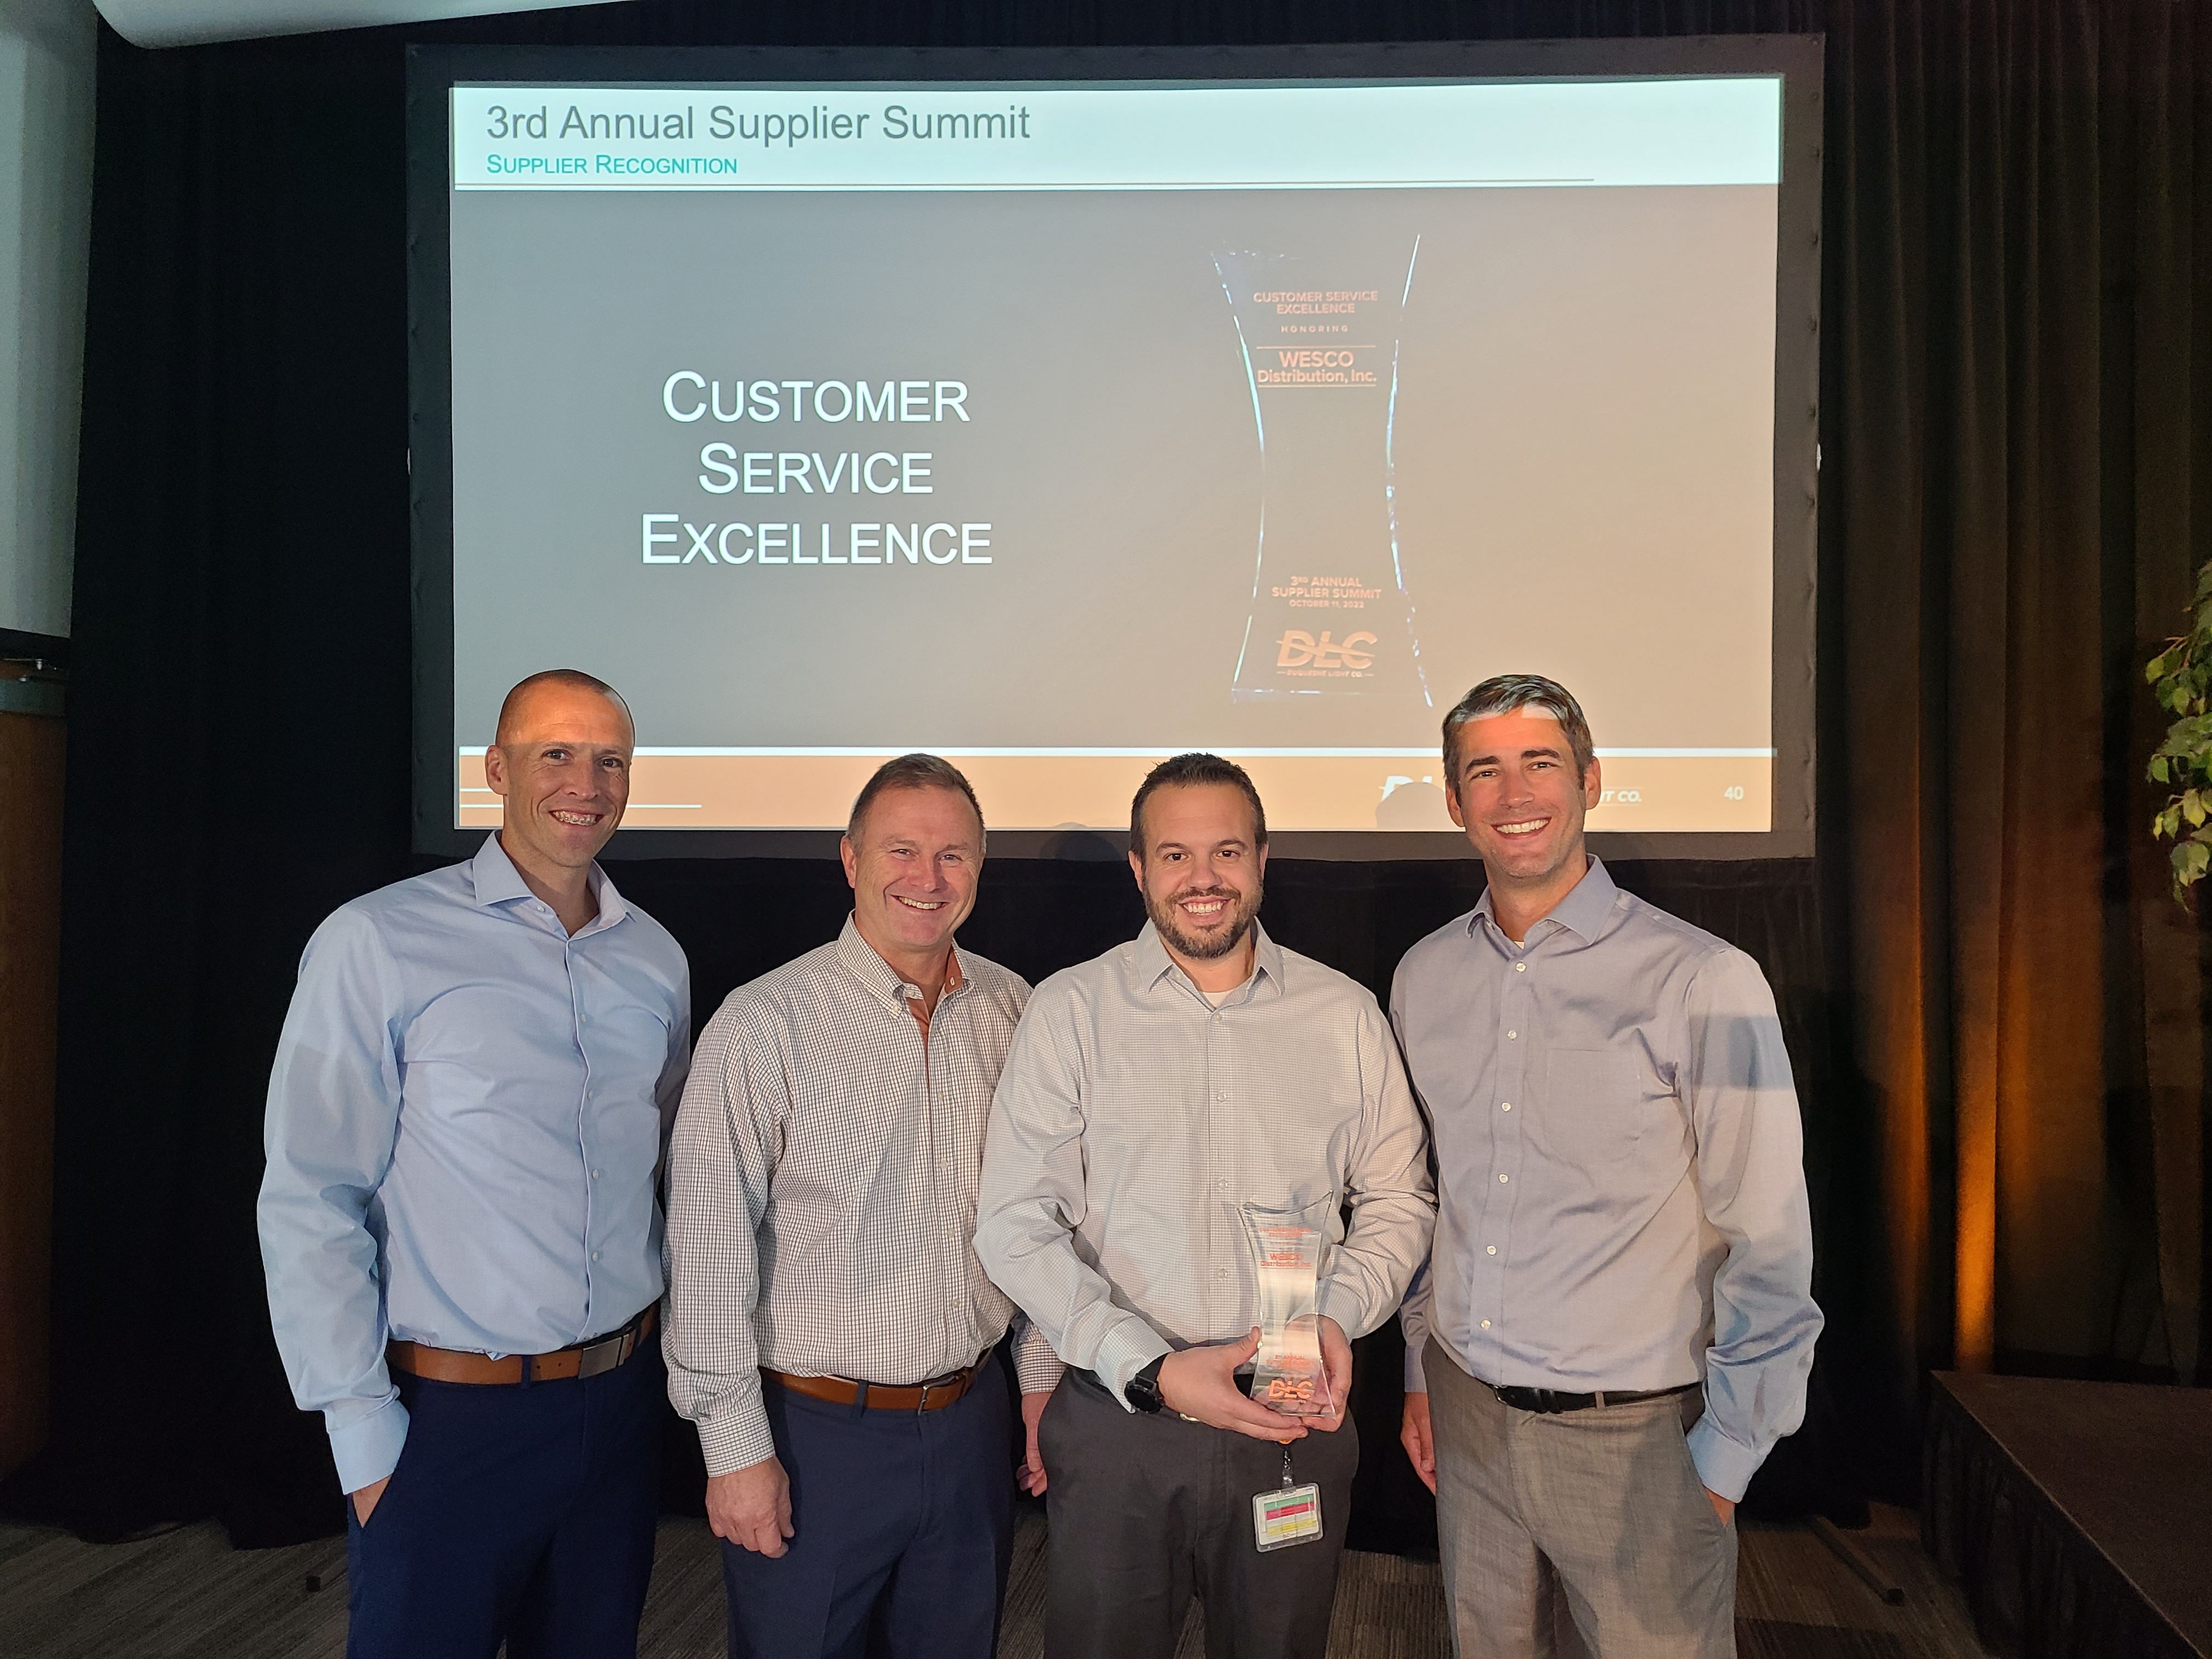 DLC Procurement Manager Brad Hiltz (L) pictured with representatives from Wesco International, which won the award for Customer Service Excellence.